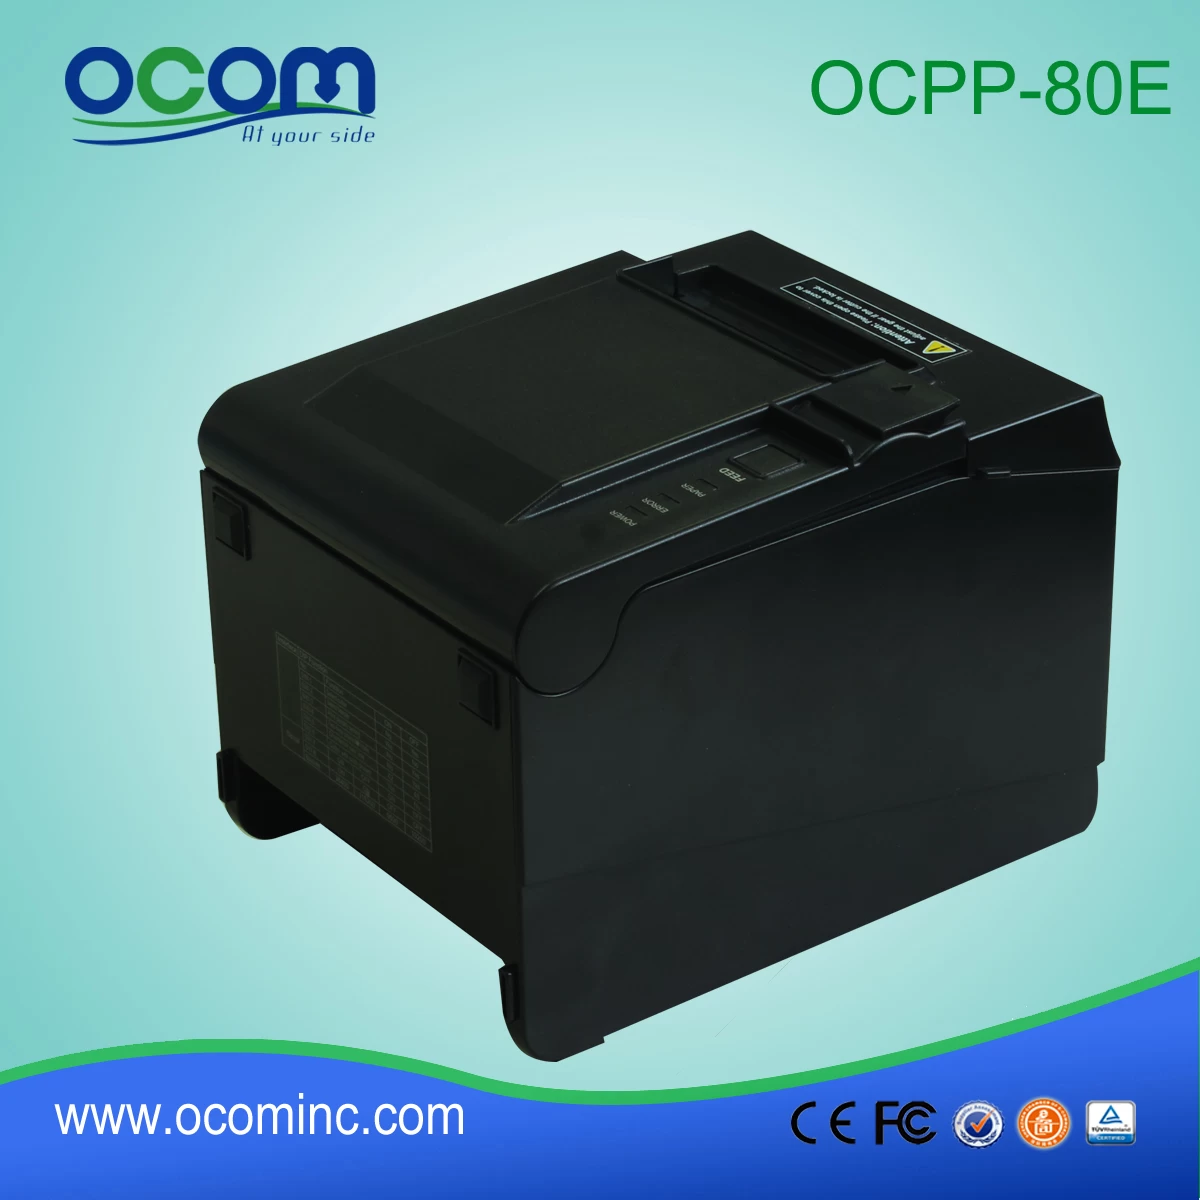 3 inch POS Thermal Receipt Printer with auto-cutter OCPP-80E